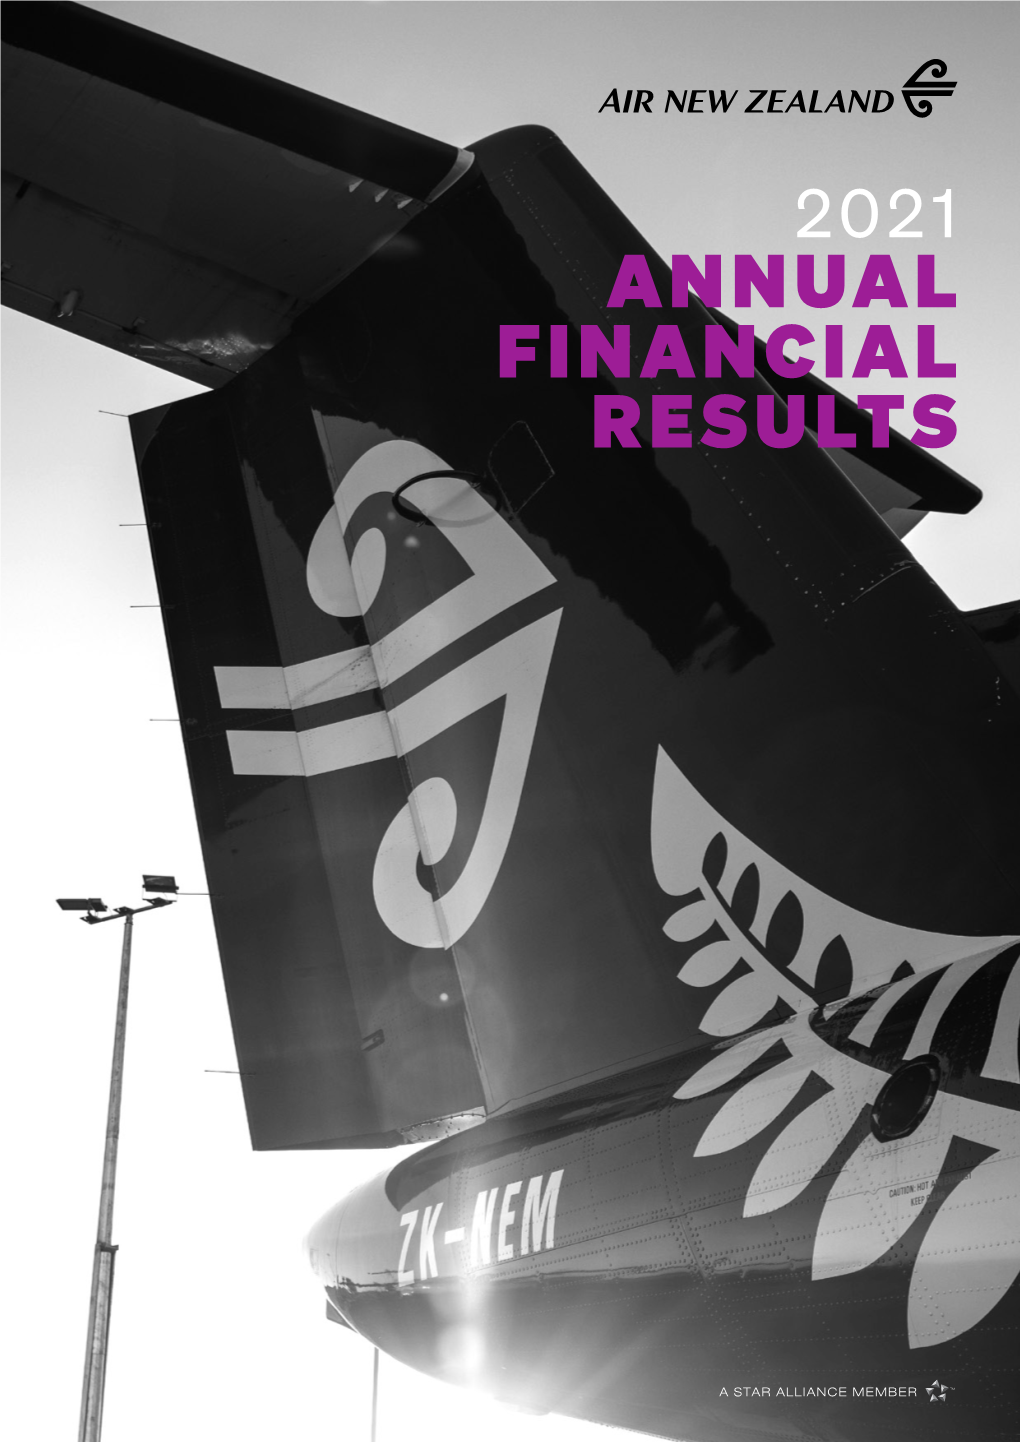 Annual Financial Results Air New Zealand Annual Financial Results 2021 Air New Zealand Annual Financial Results 2021 Air New Zealand Group